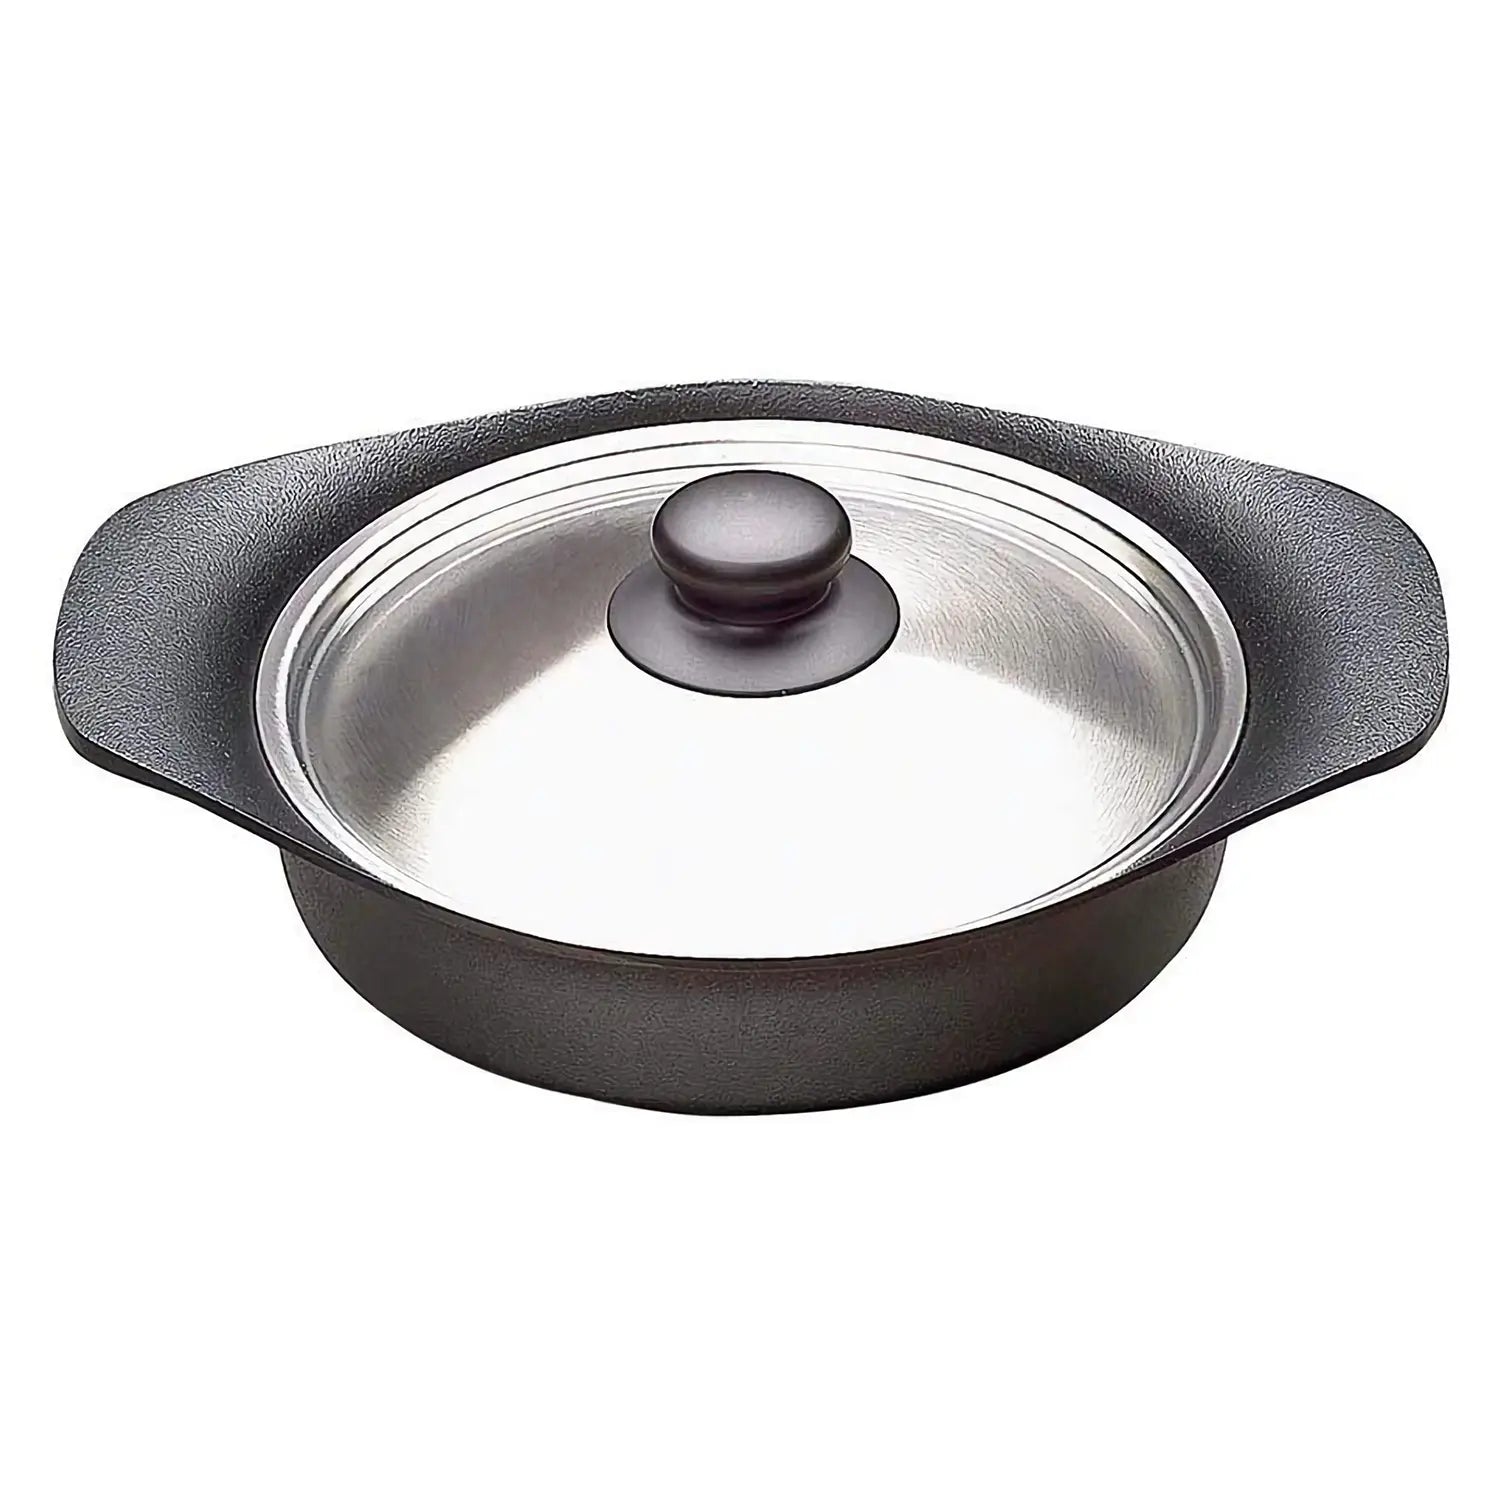 https://cdn.shopify.com/s/files/1/1610/3863/products/SoriYanagiCastIronInductionShallowCasserole22cmwithStainlessSteelLid_1_1600x.webp?v=1668475867